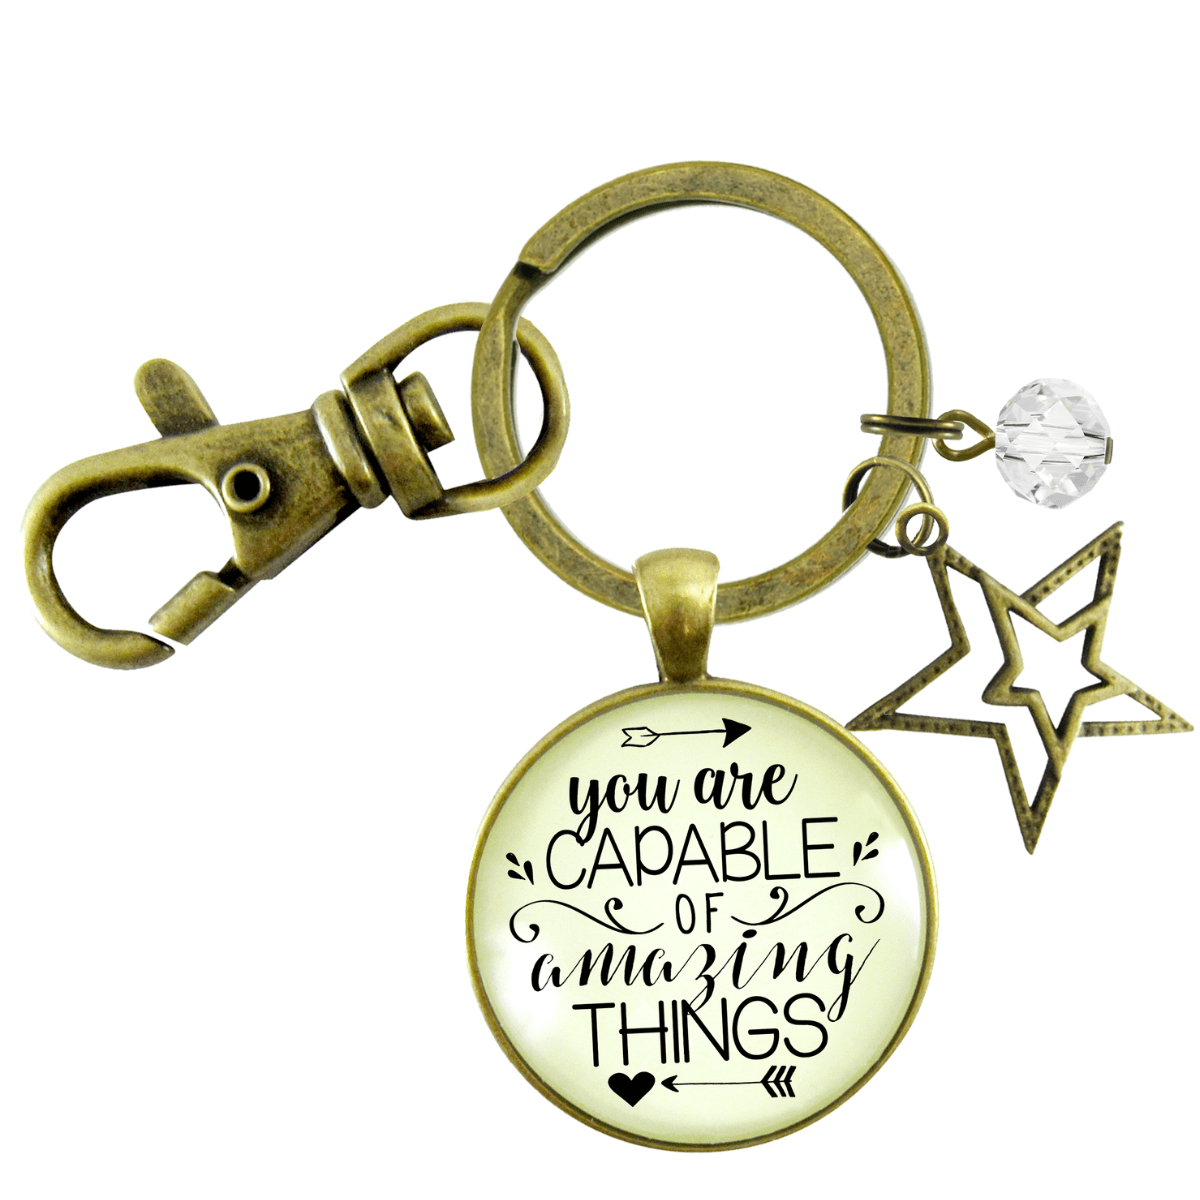 You Are Capable of Amazing Things Keychain Positive Message Quote Mantra Gift Jewelry - Gutsy Goodness